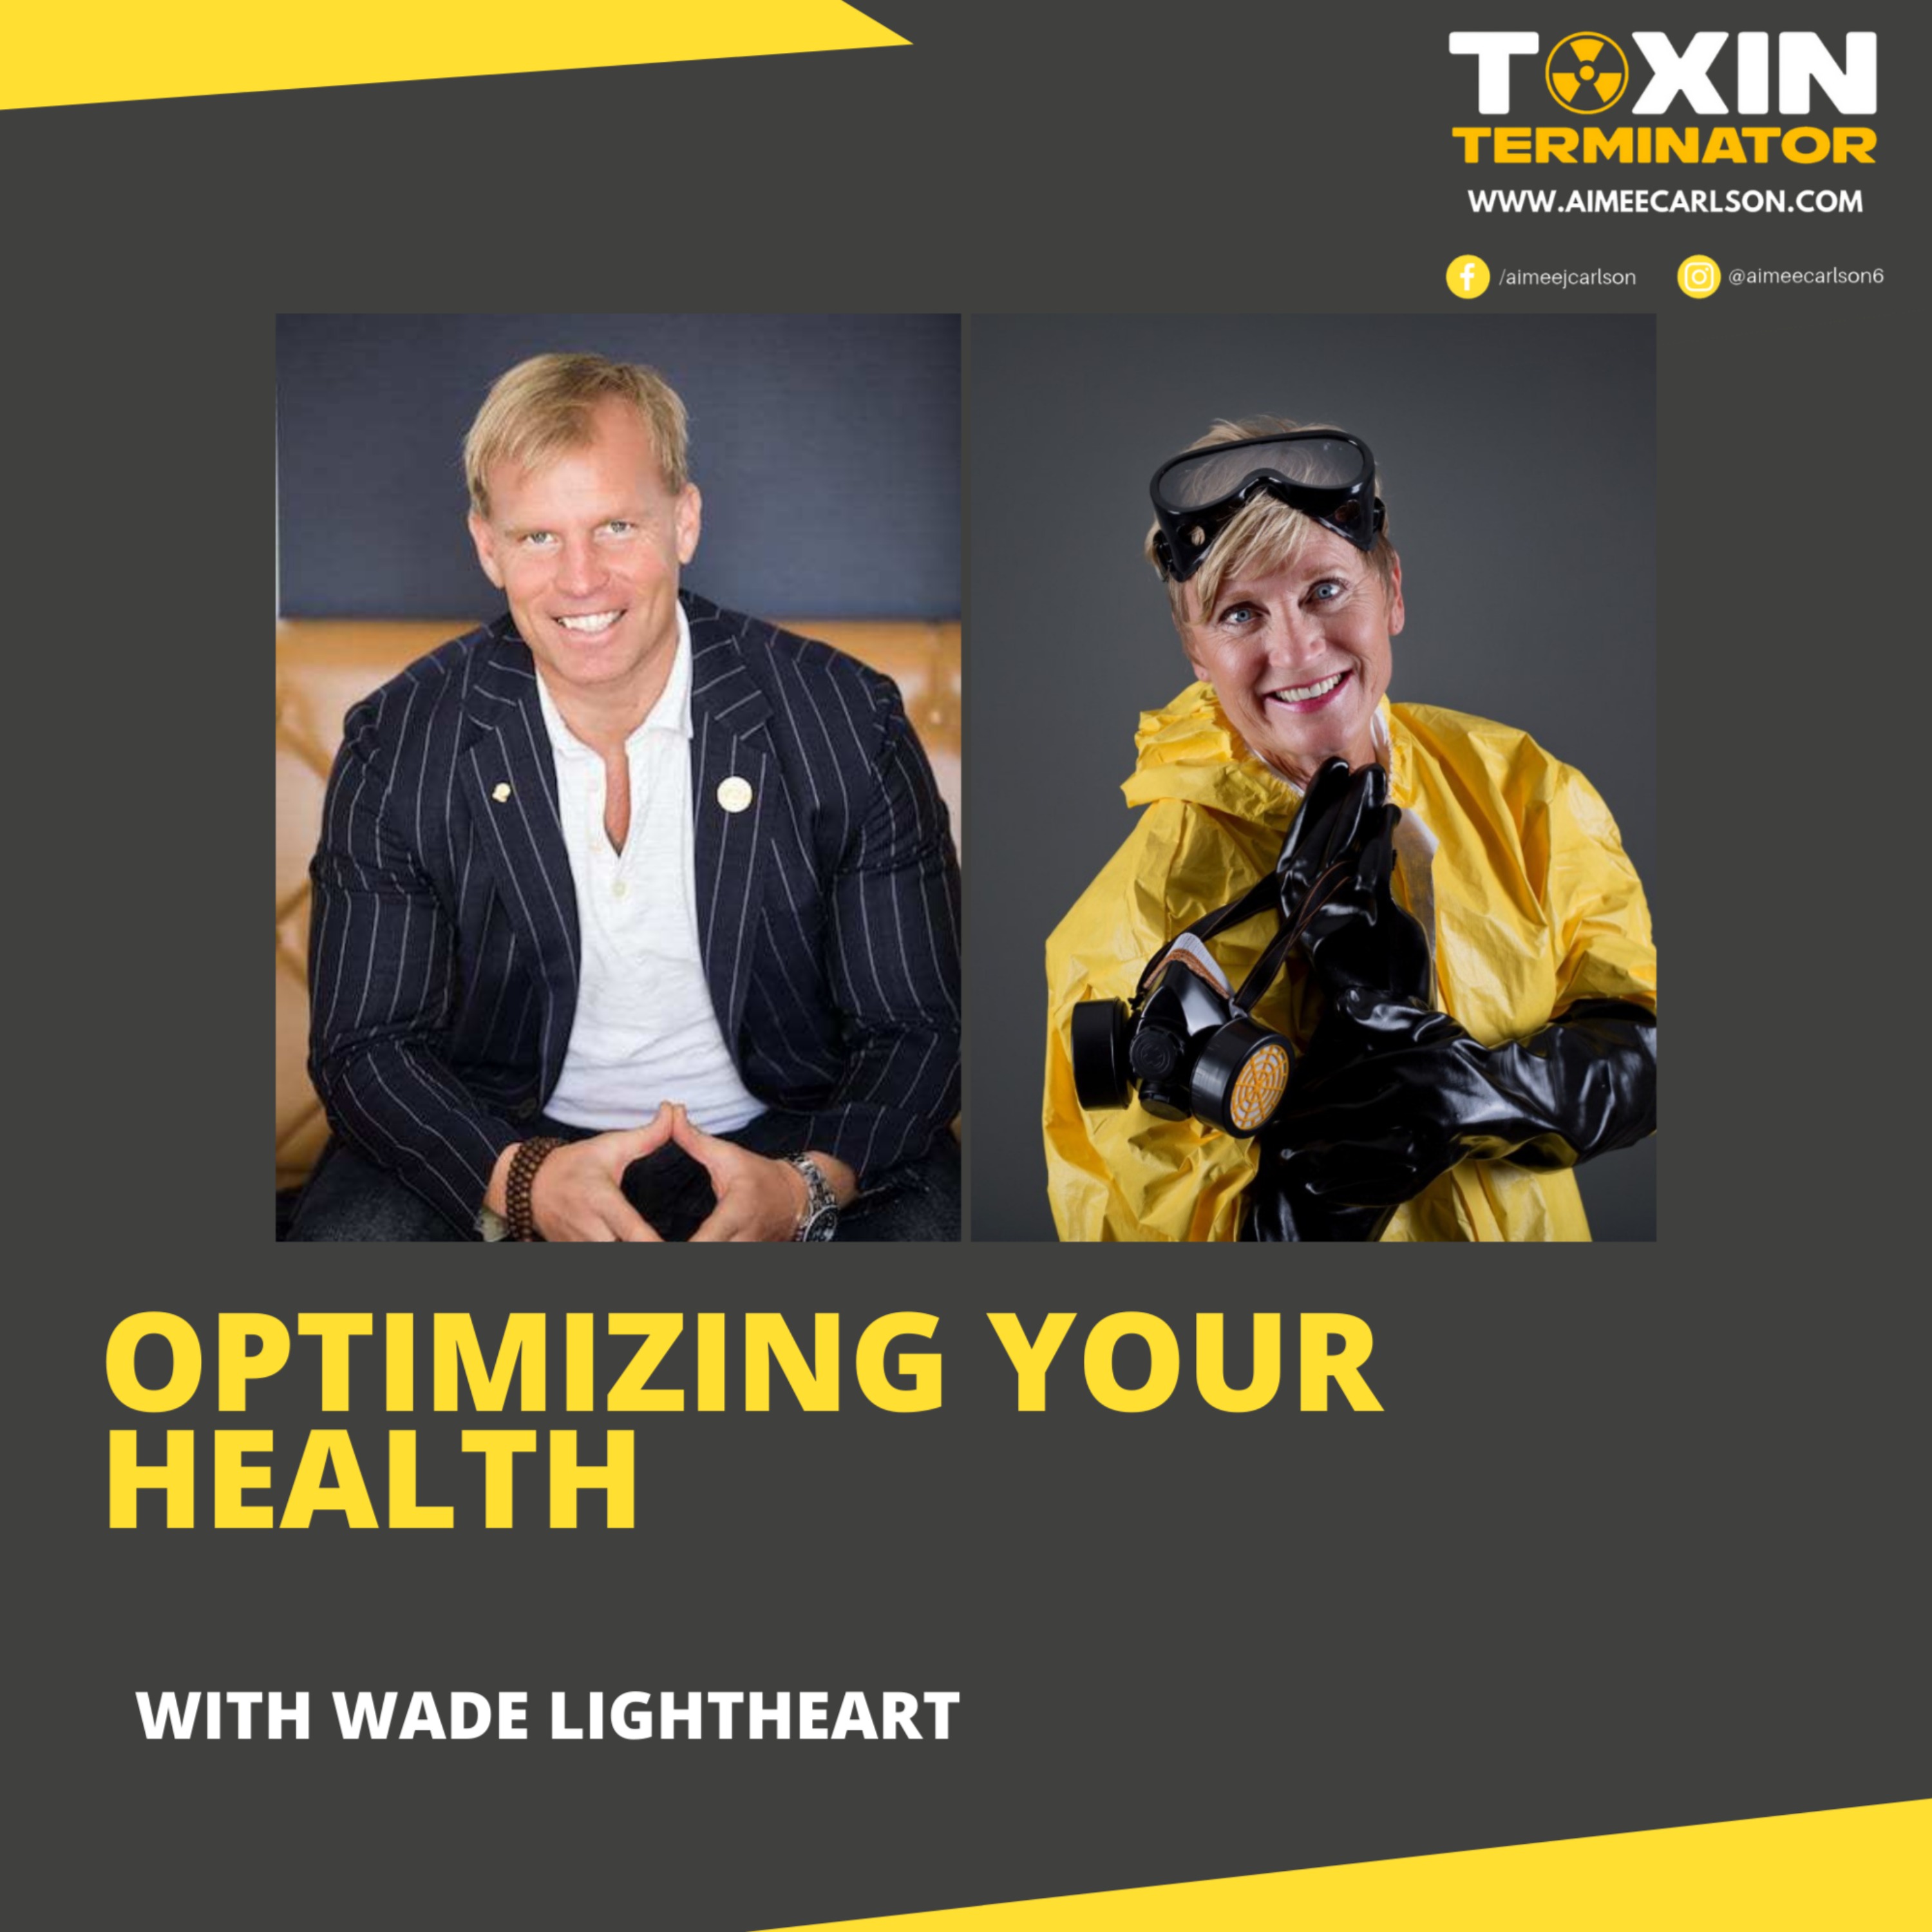 Optimizing Your Health with Wade Lightheart